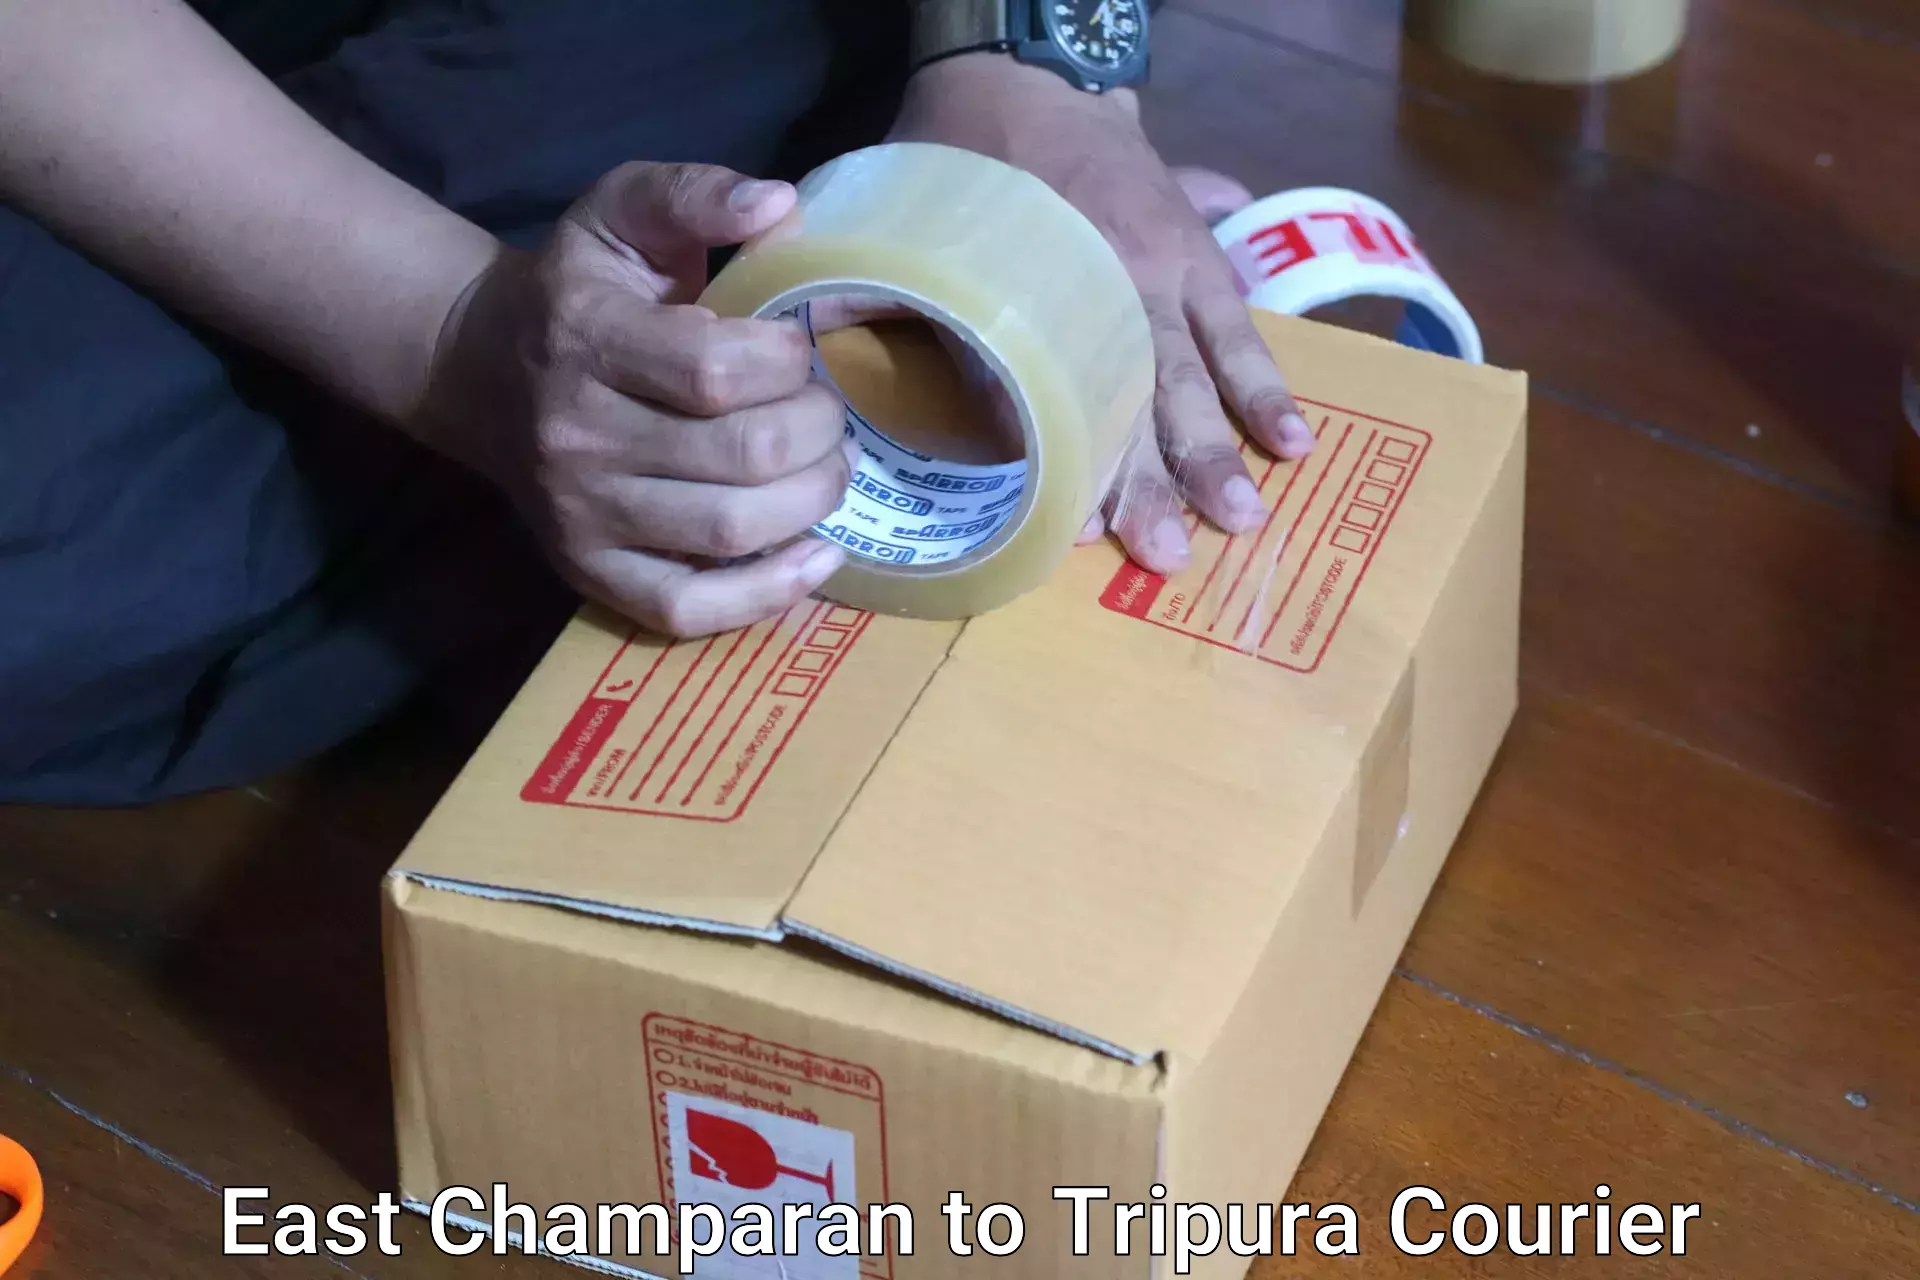 High-quality baggage shipment in East Champaran to Udaipur Tripura